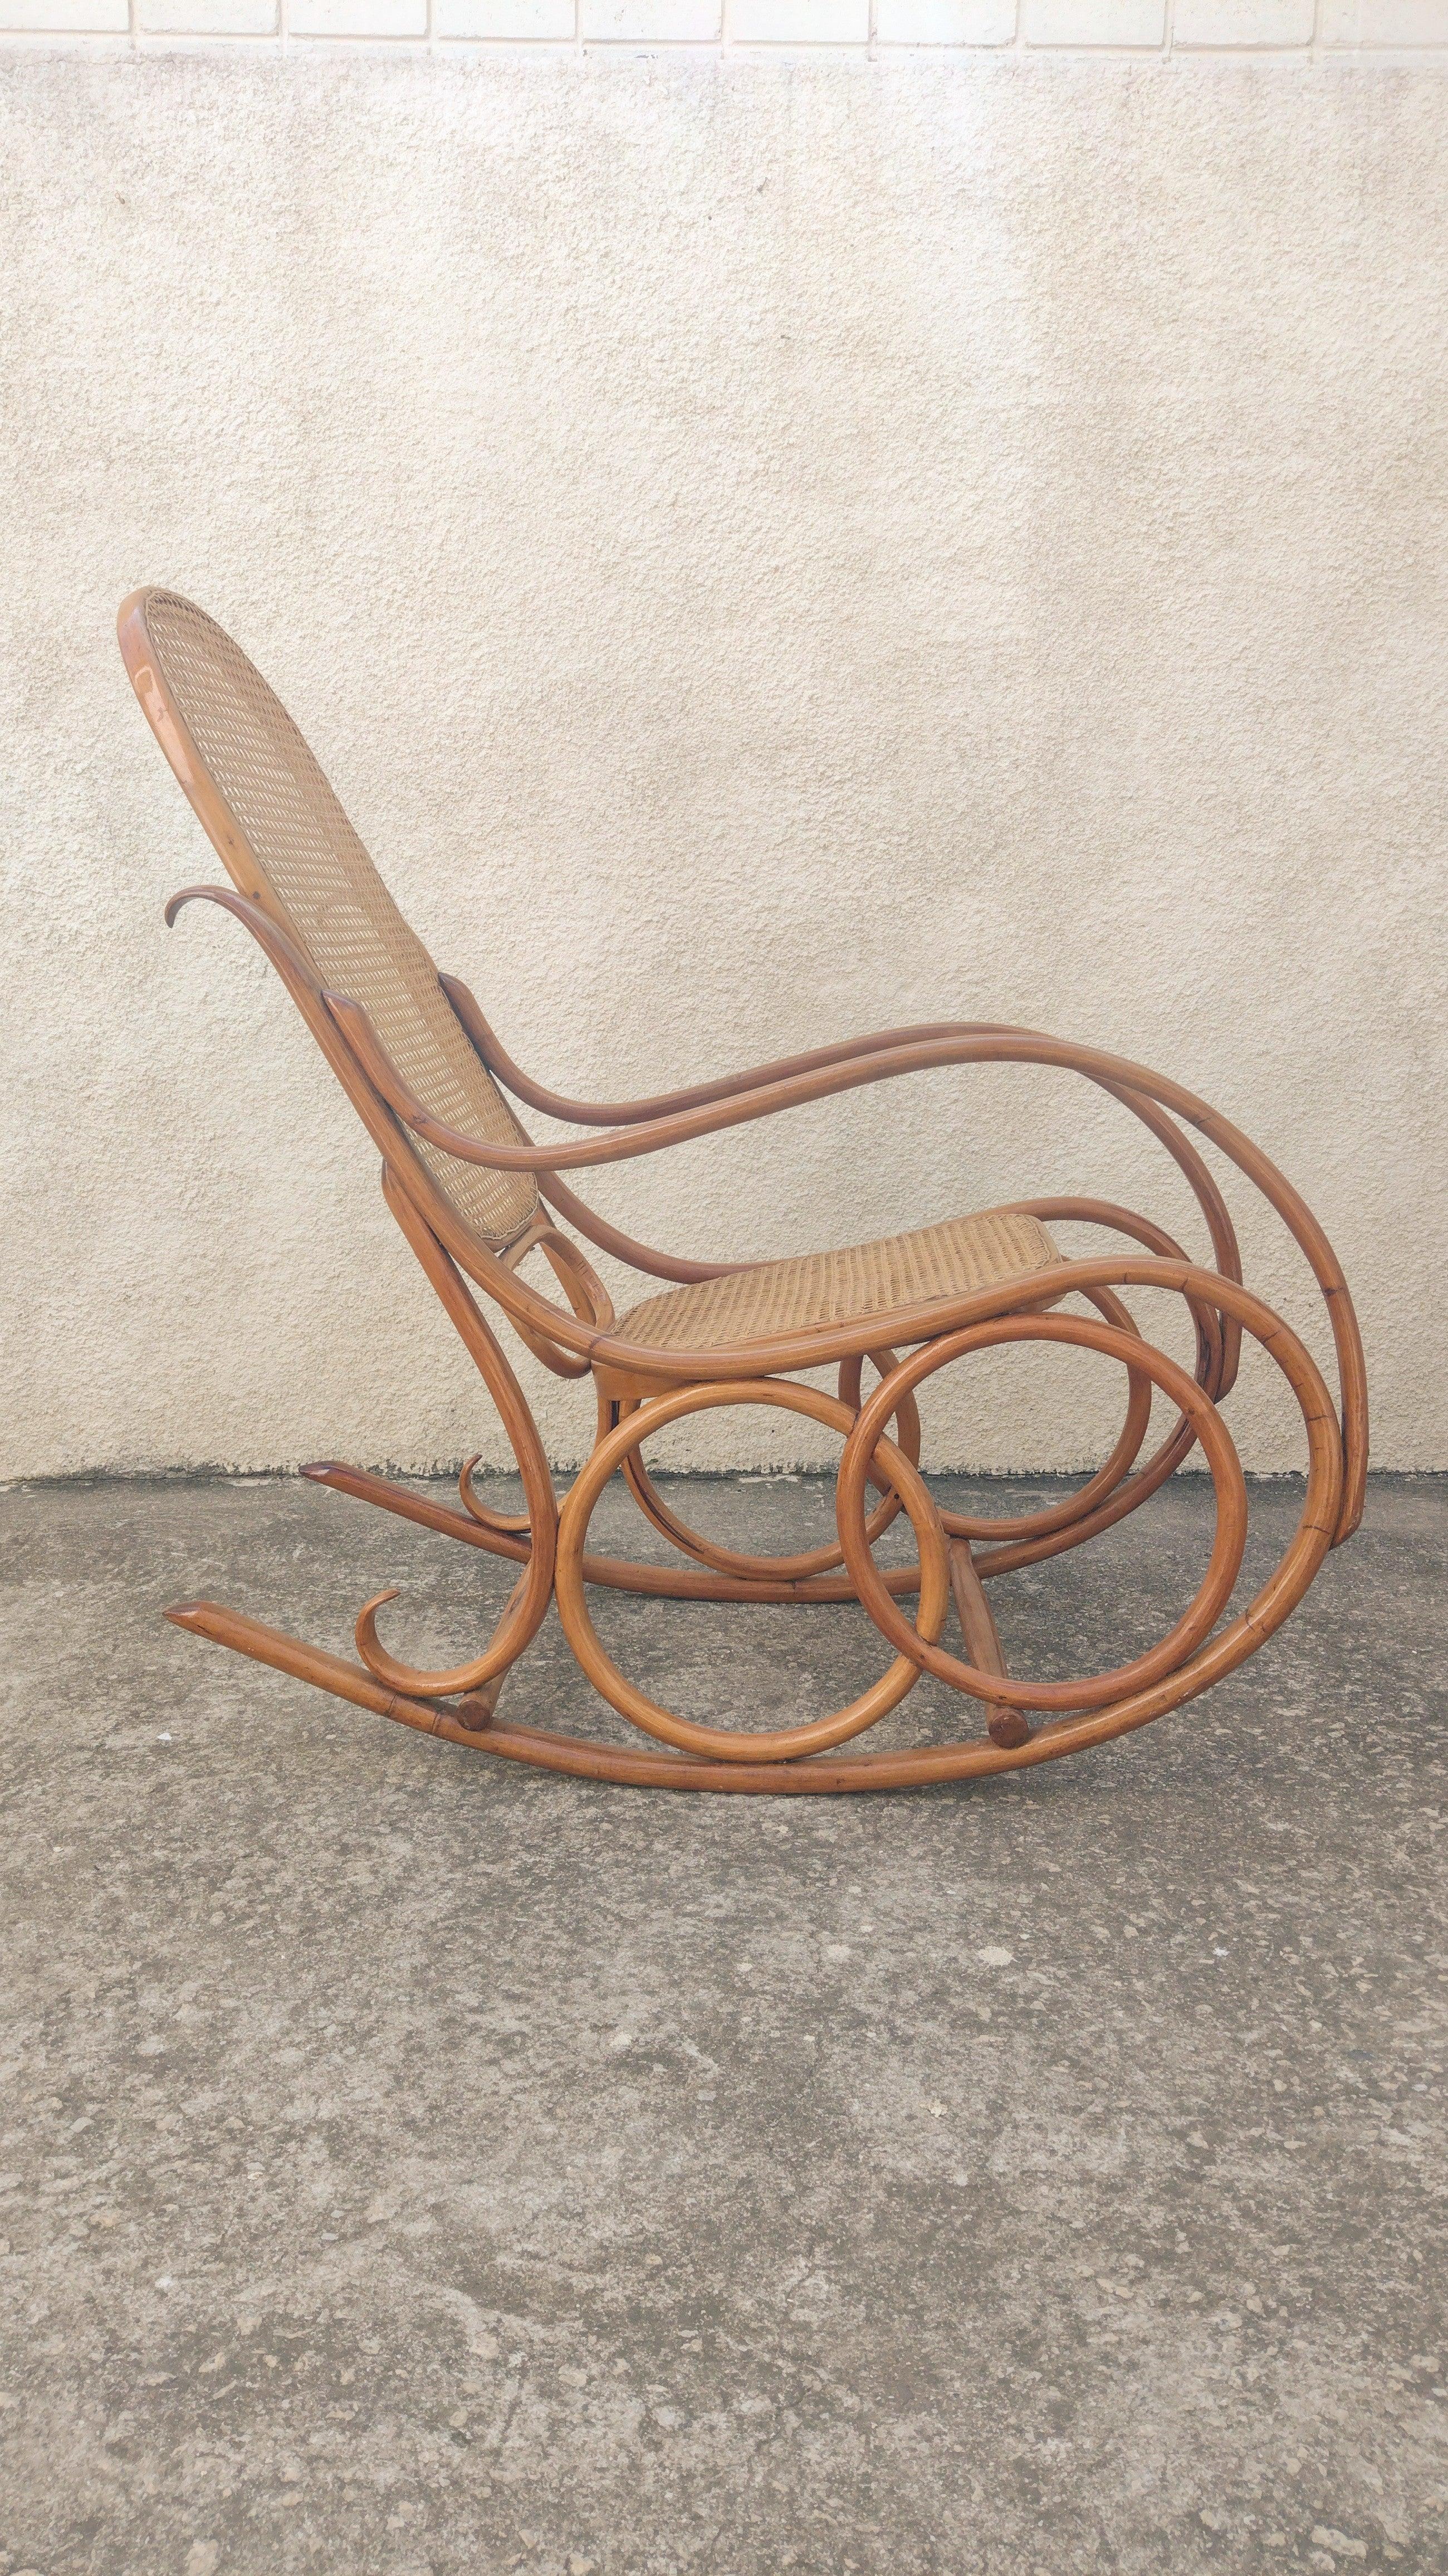 Brazilian Rocking Chair in Curved Wood and Indian Straw, 1960s For Sale 1